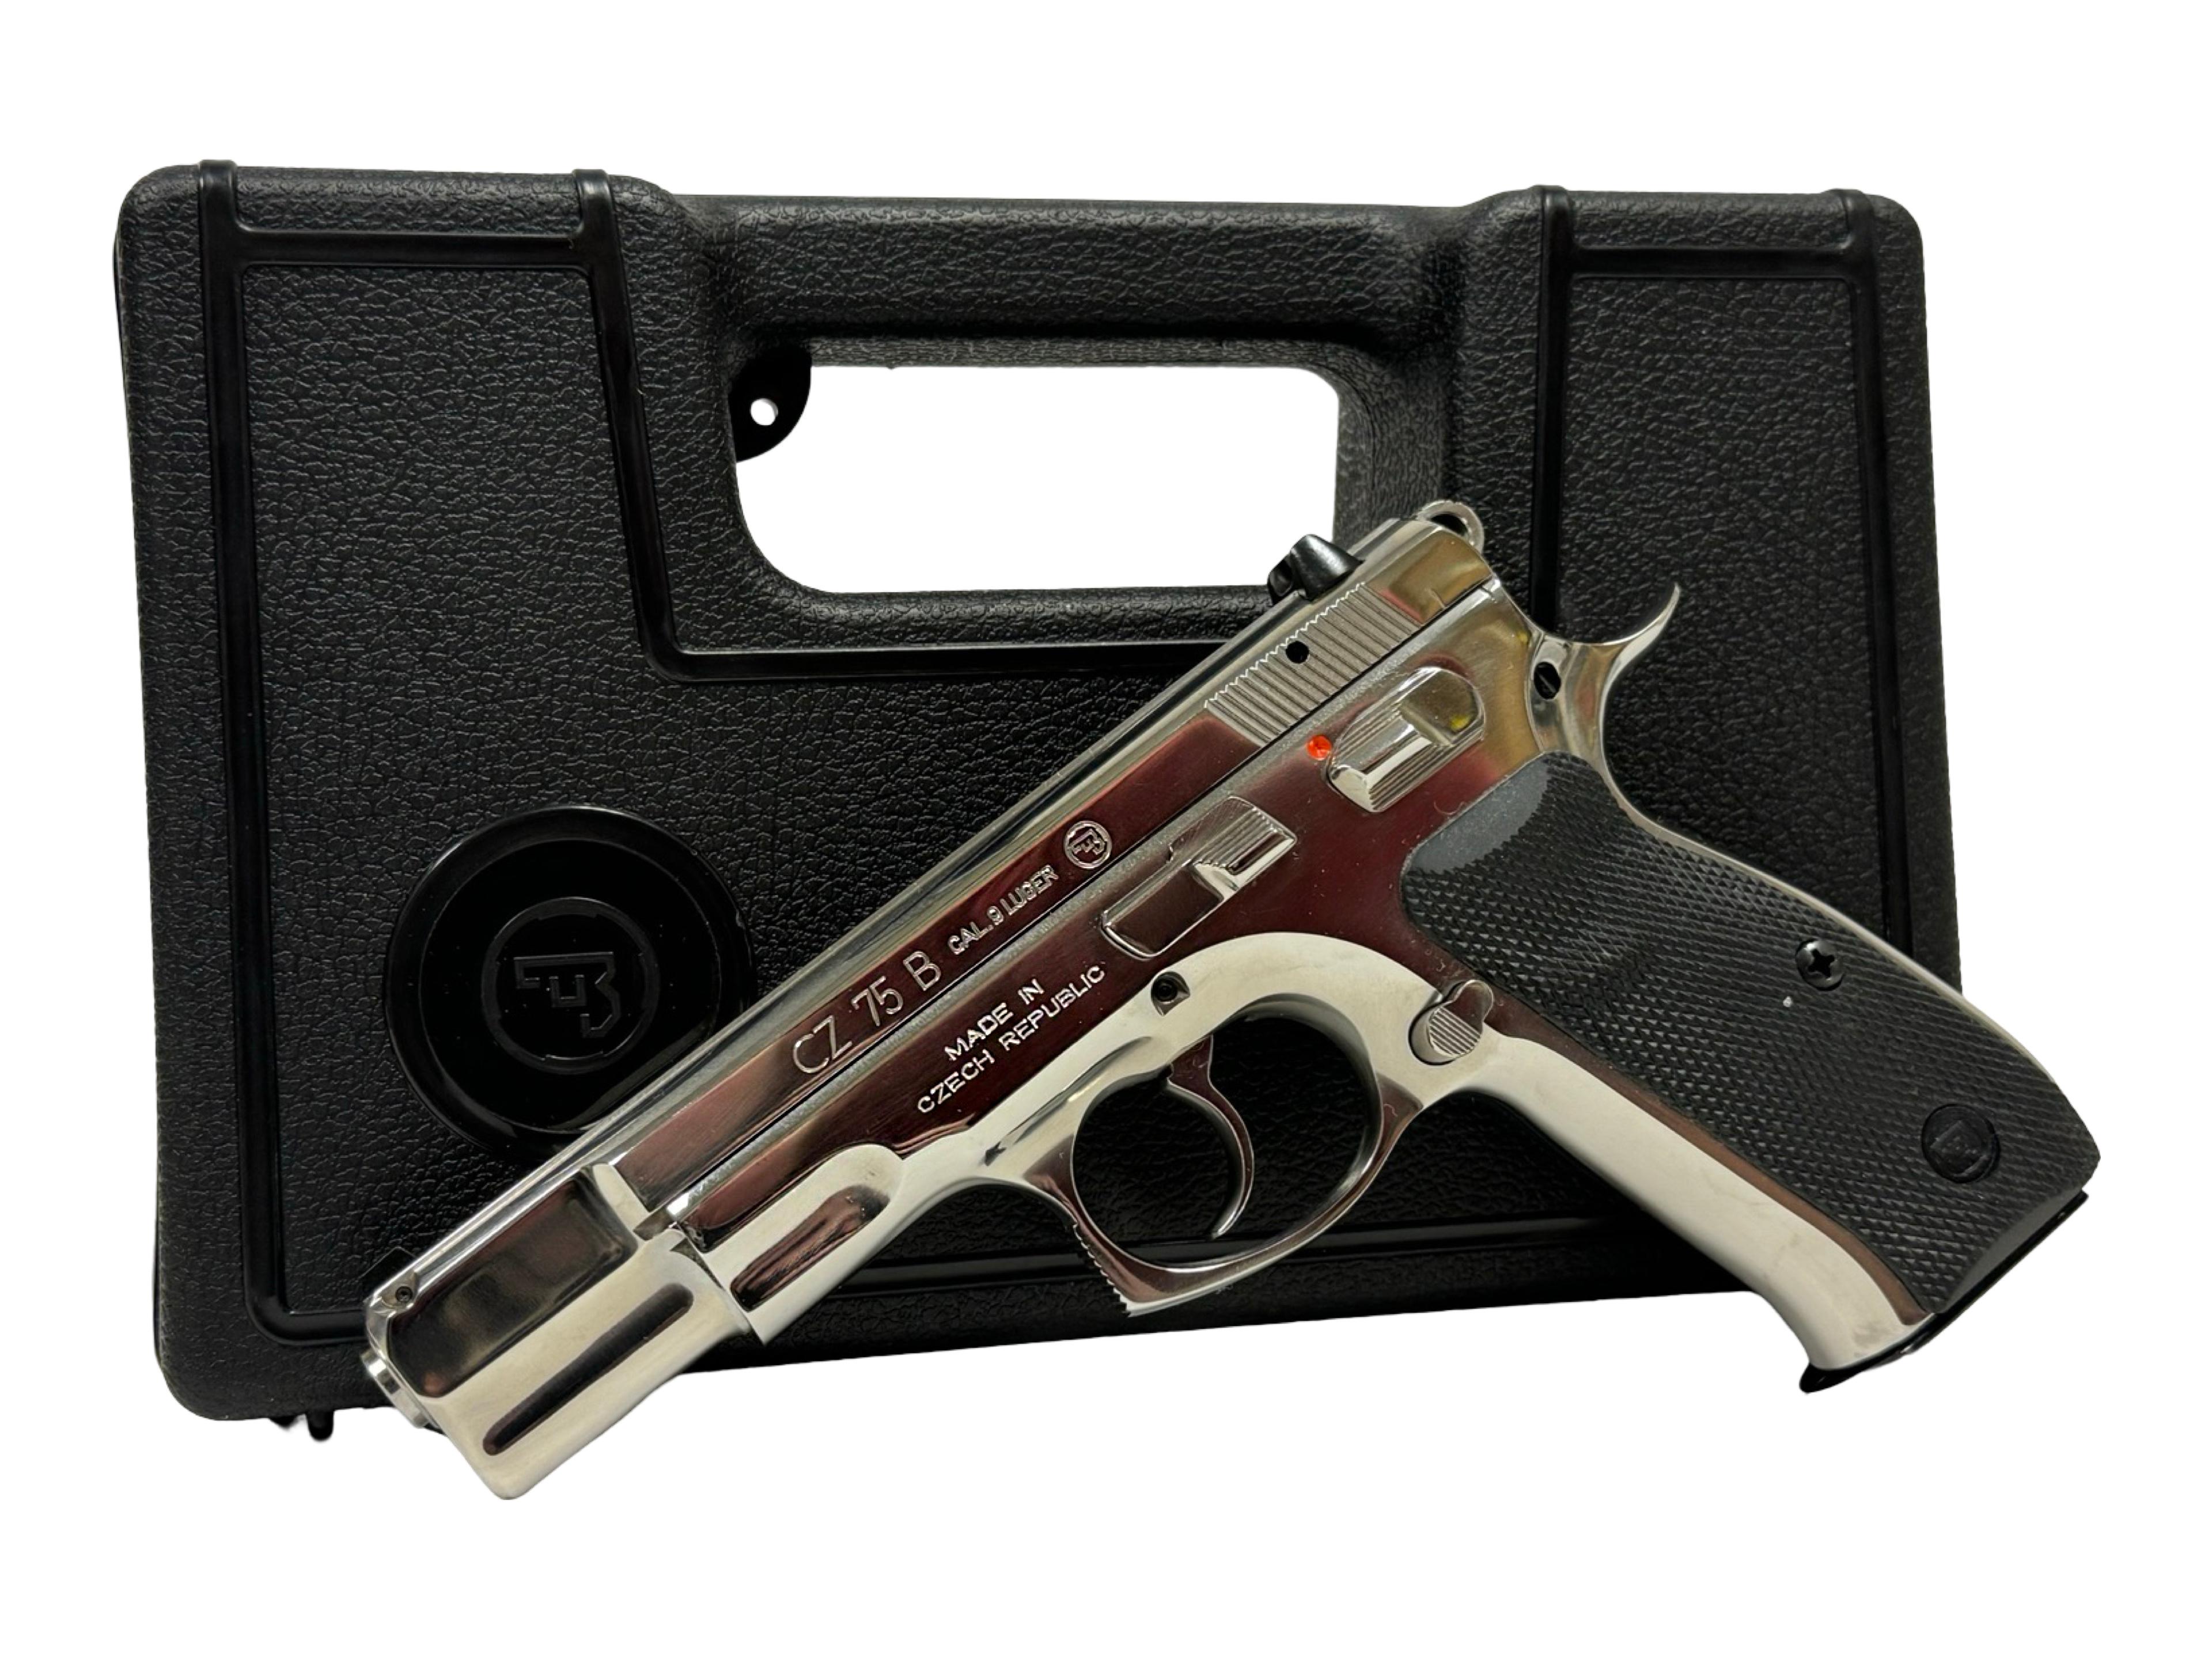 NIB Rare CZ 75 B 9mm LUGER High Polished Stainless Steel Semi-Automatic Pistol with (3) Magazines